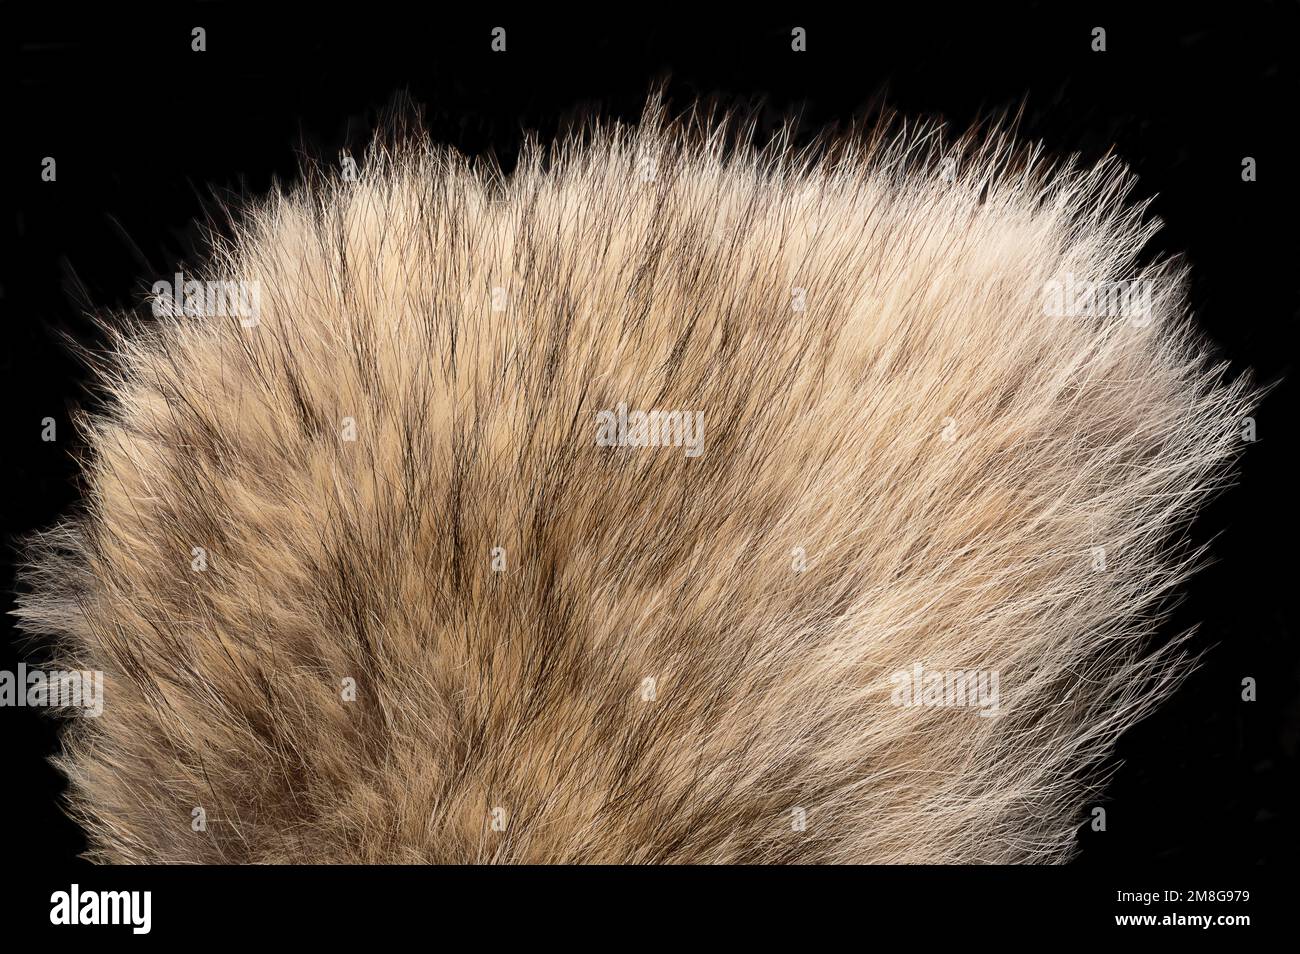 Real grey wolf fur, close-up, from above. Wolf pelt with silky, fluffy and bushy fur fibers, primarily used for scarfs. Thick growth of hair. Stock Photo